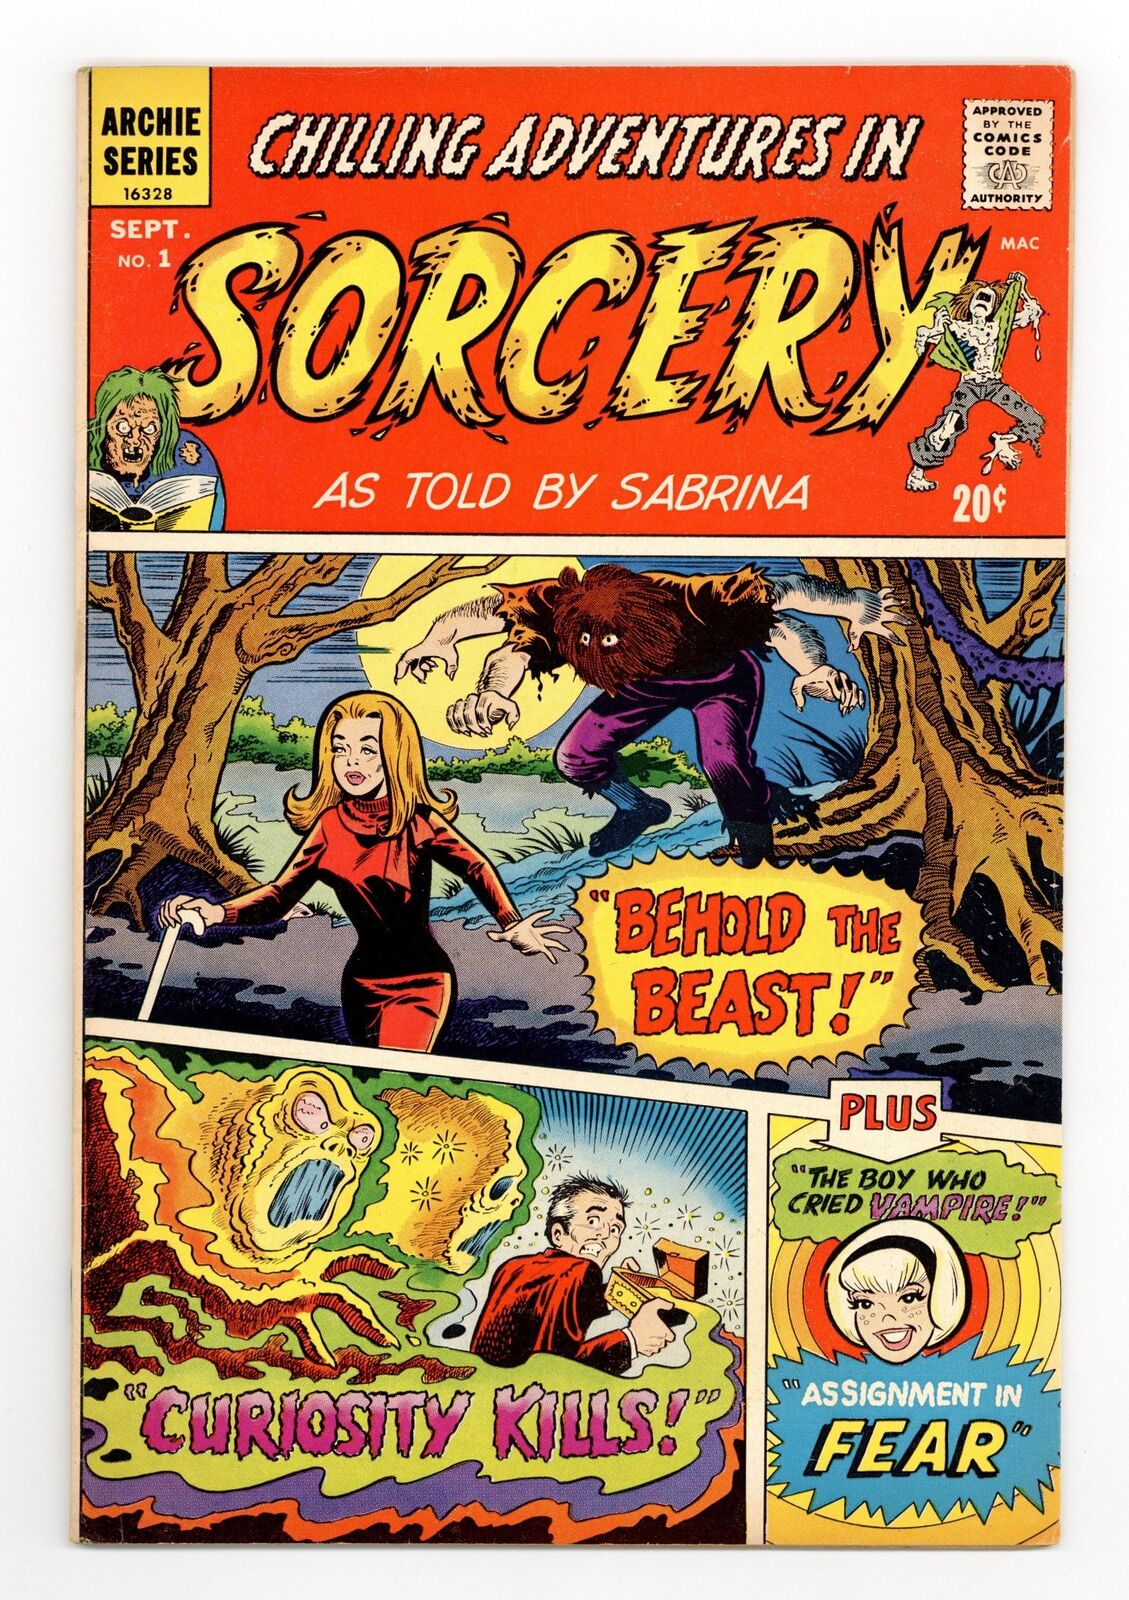 Chilling Adventures in Sorcery #1 FN- 5.5 1972